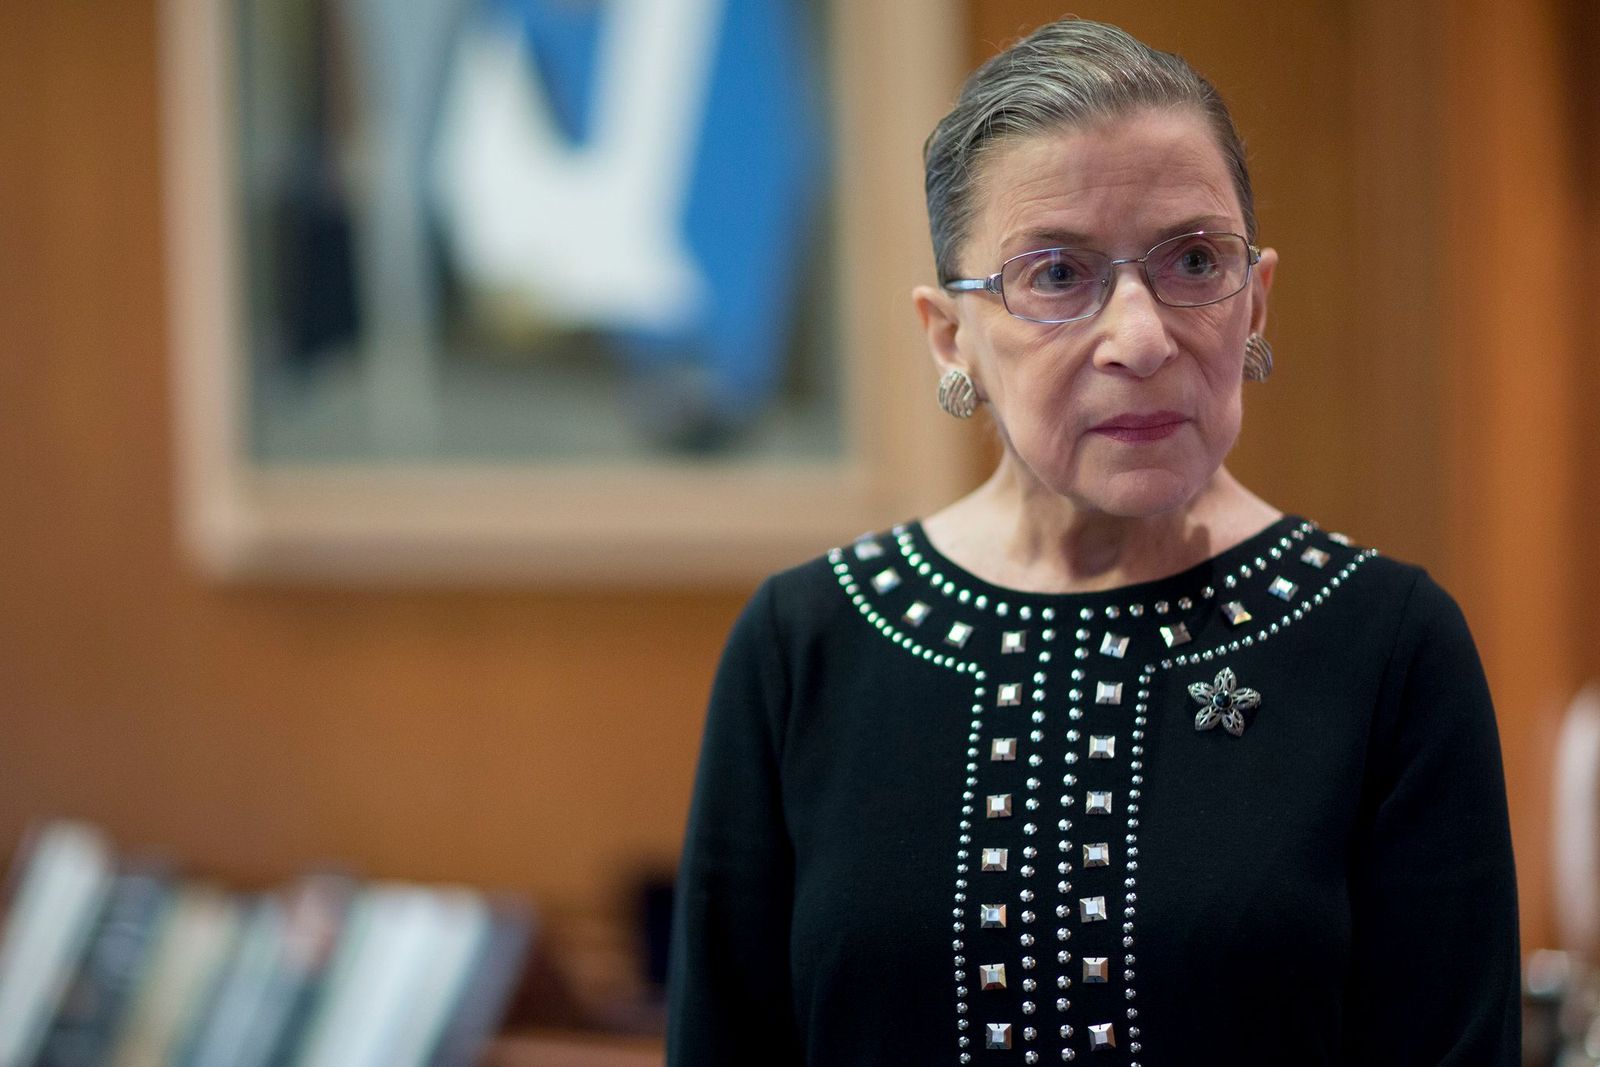 Ruth Bader Ginsburg in her chambers after an interview in Washington, D.C. on August 23, 2013 | Photo: Andrew Harrer/Bloomberg/Getty Images